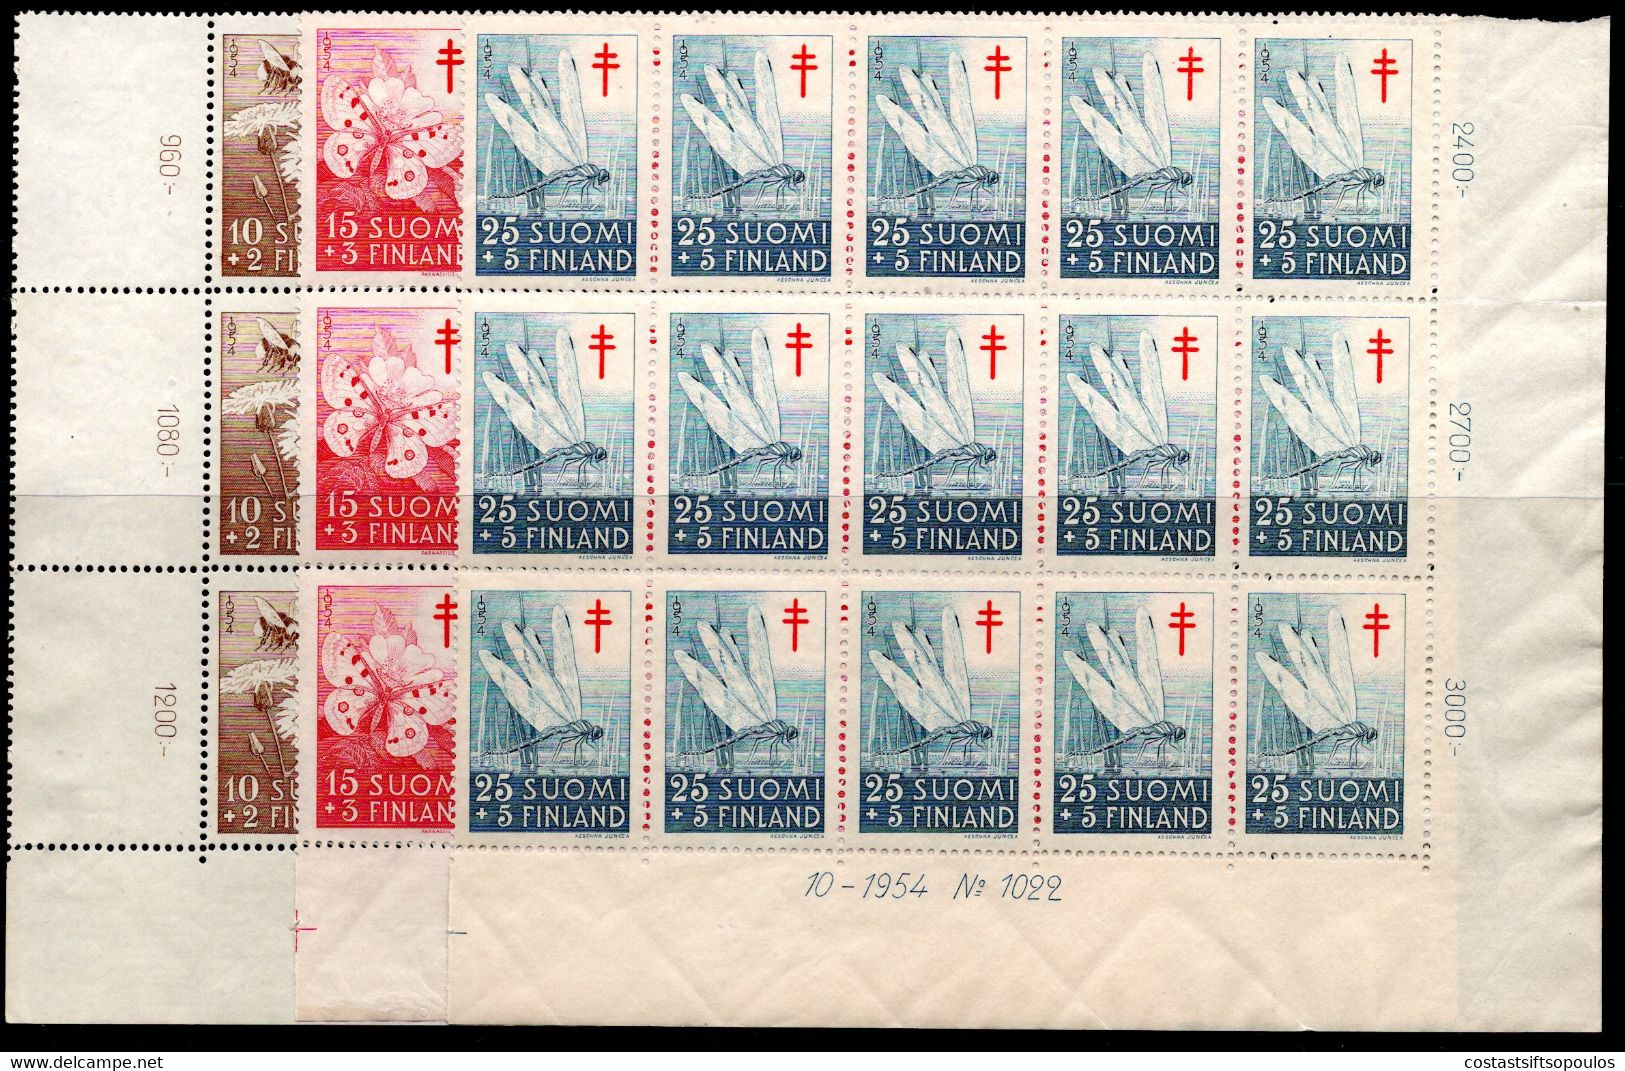 843.FINLAND.1954 INSECTS,MNH IMPRINT BLOCKS OF 15,SC. B126-B128 - Full Sheets & Multiples